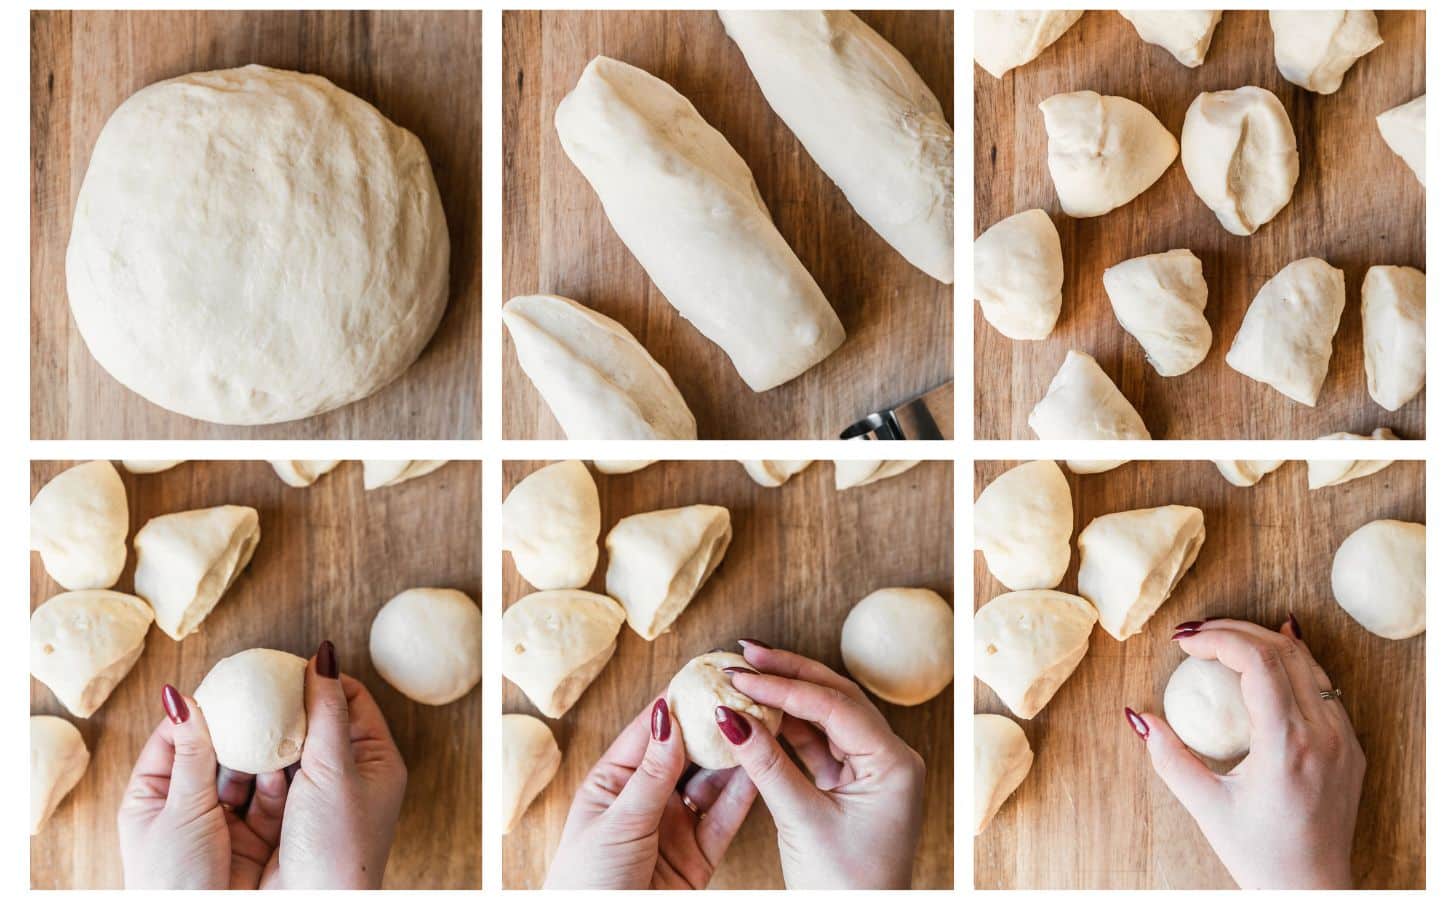 Six steps to shaping dinner rolls. In photo 1, a round of dough is on a wood board. In photo 2, the dough is cut into 3 pieces. In photo 3, the dough is cut in various pieces. In photo 4, a woman's hands are shaping the dough into a ball. In photo 5, the hands are pinching the bottom of the roll. In photo 6, a hand is smoothing the roll on the wood board.